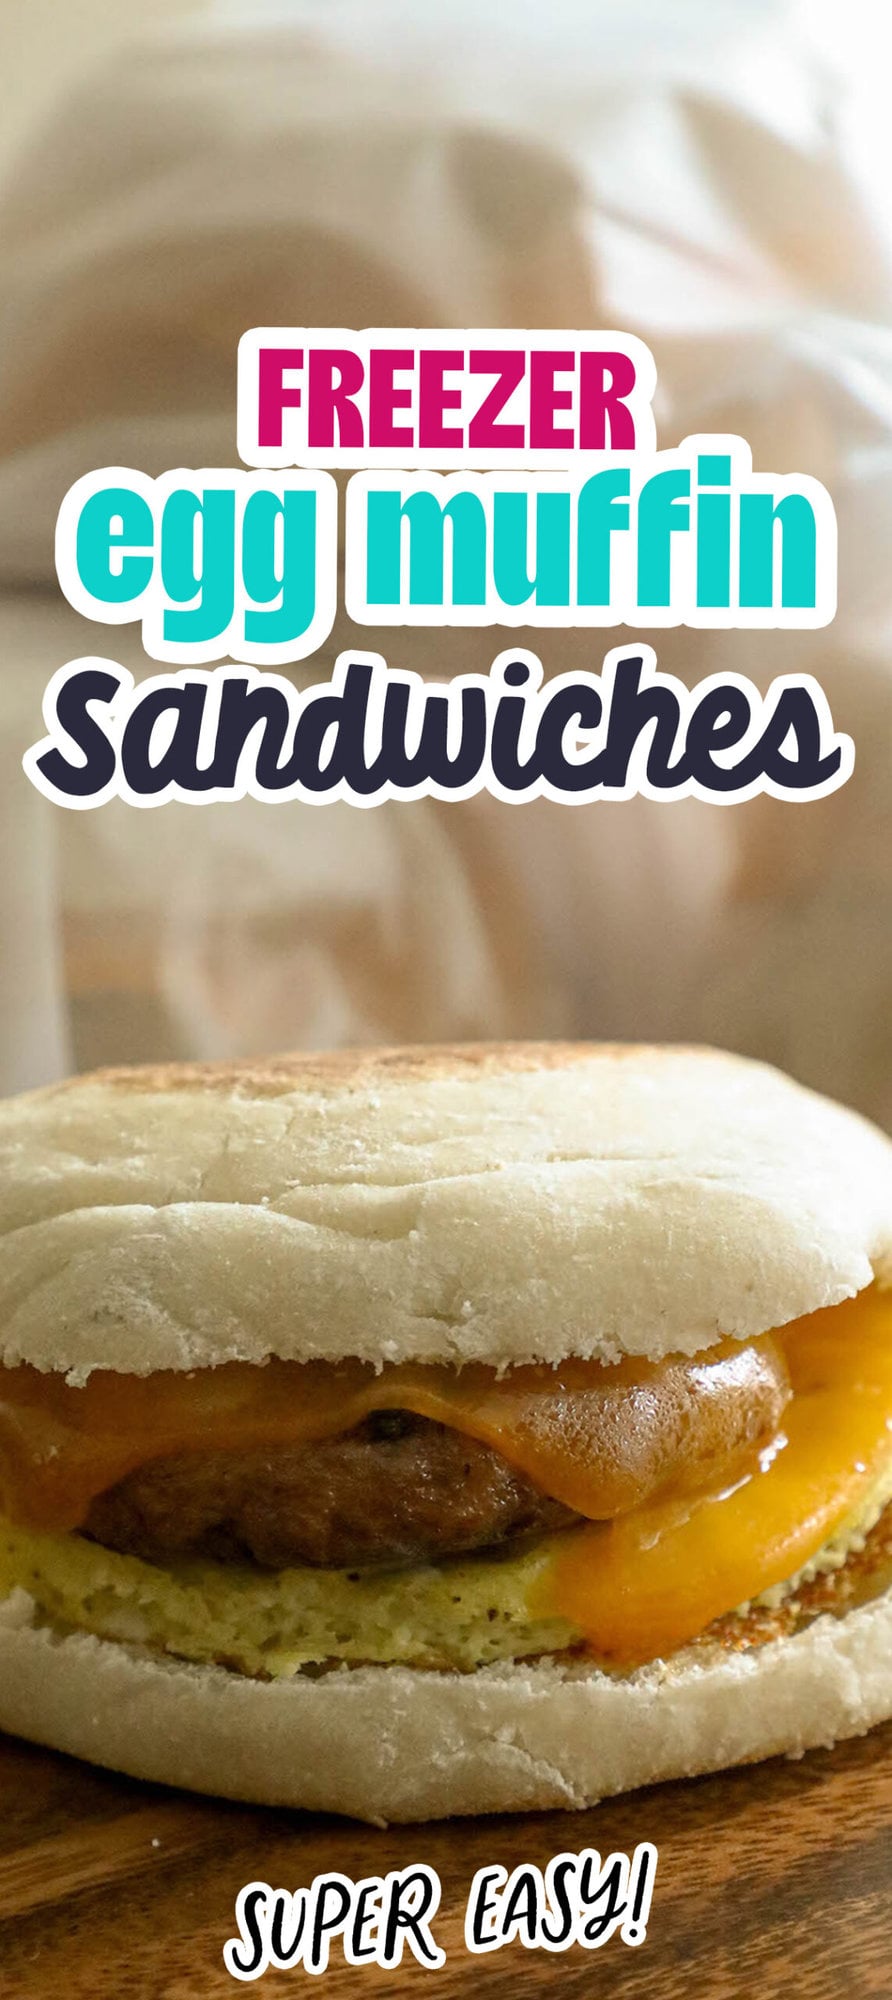 english muffin with sausage, cheese, and egg